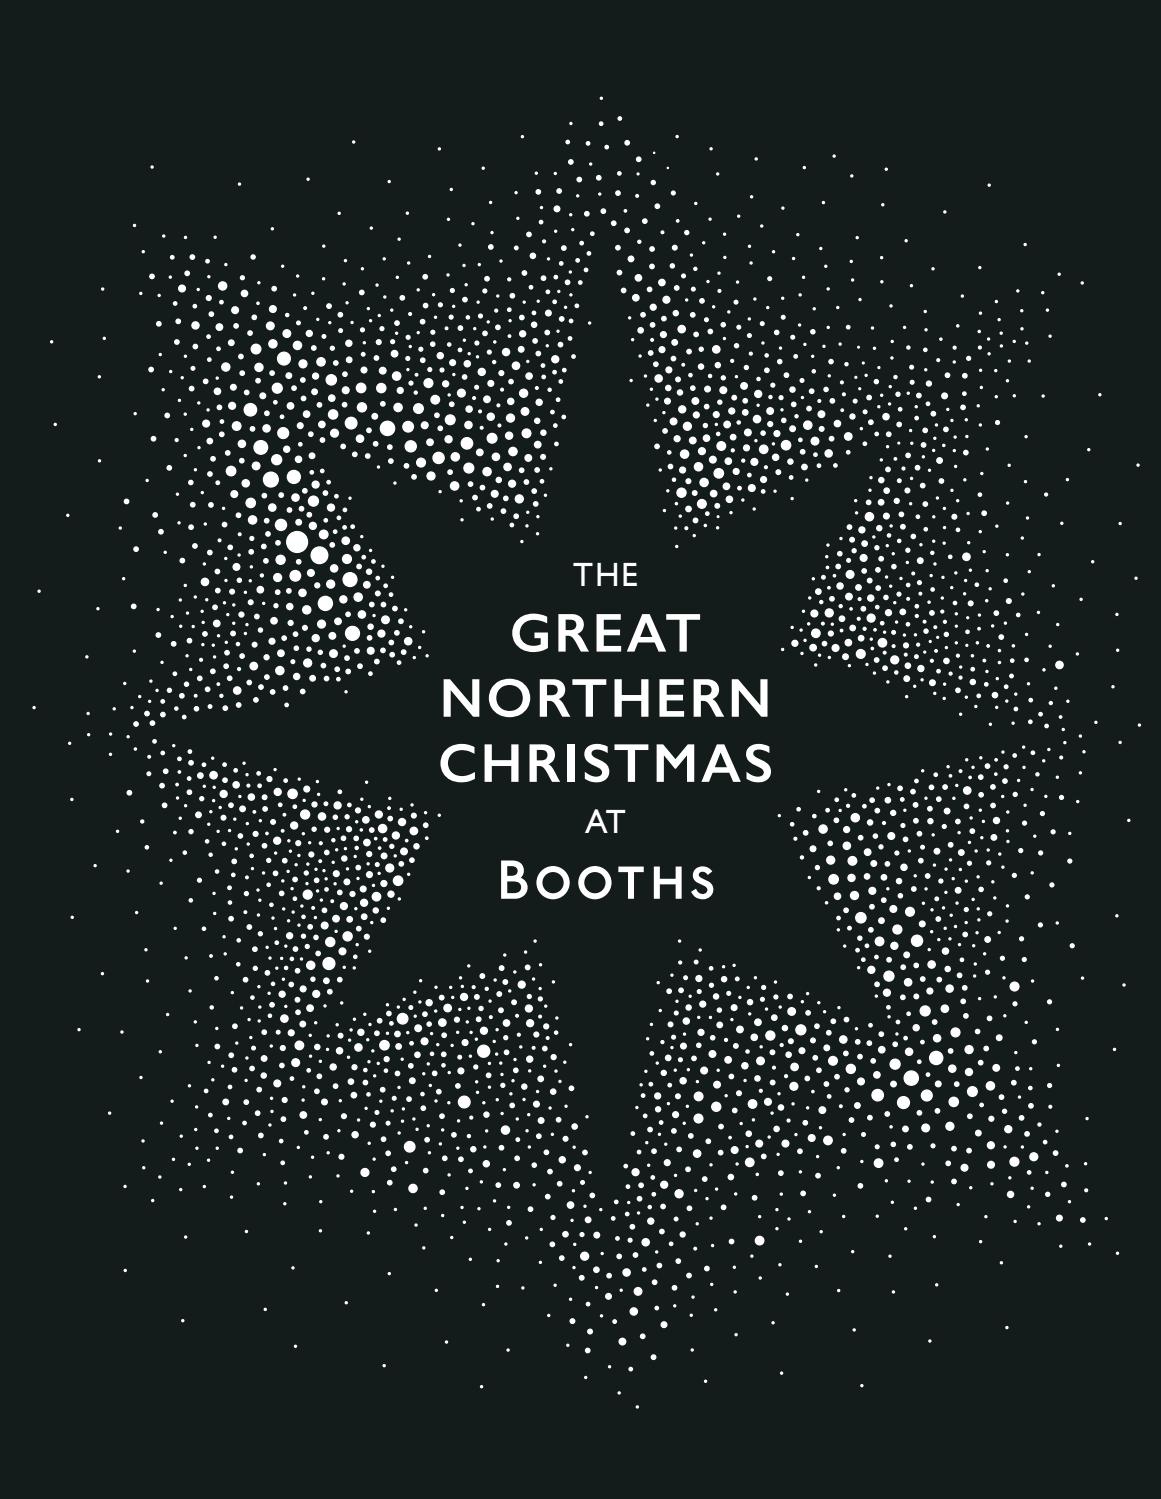 Booths Christmas Book Cover 2017